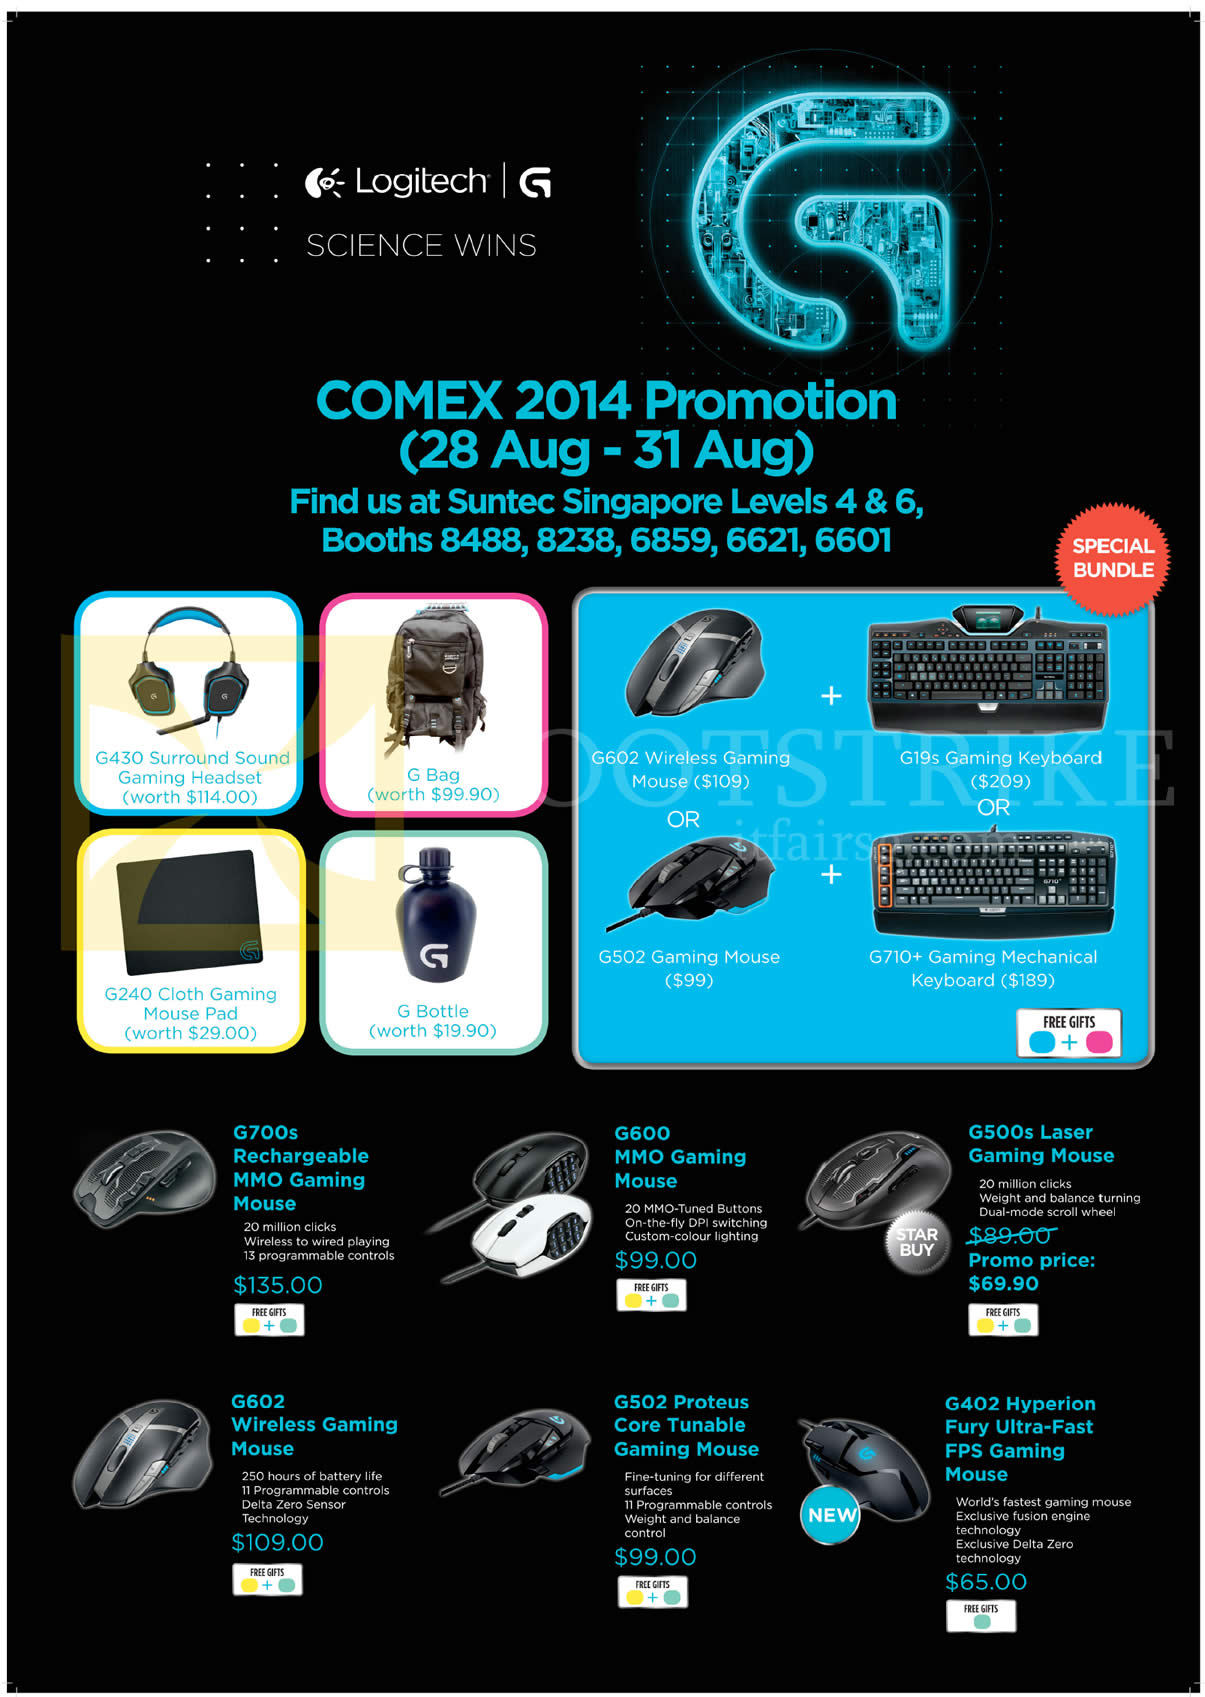 COMEX 2014 price list image brochure of Logitech Gaming Mouse G700s, G600, G500s, G602, G502, G402